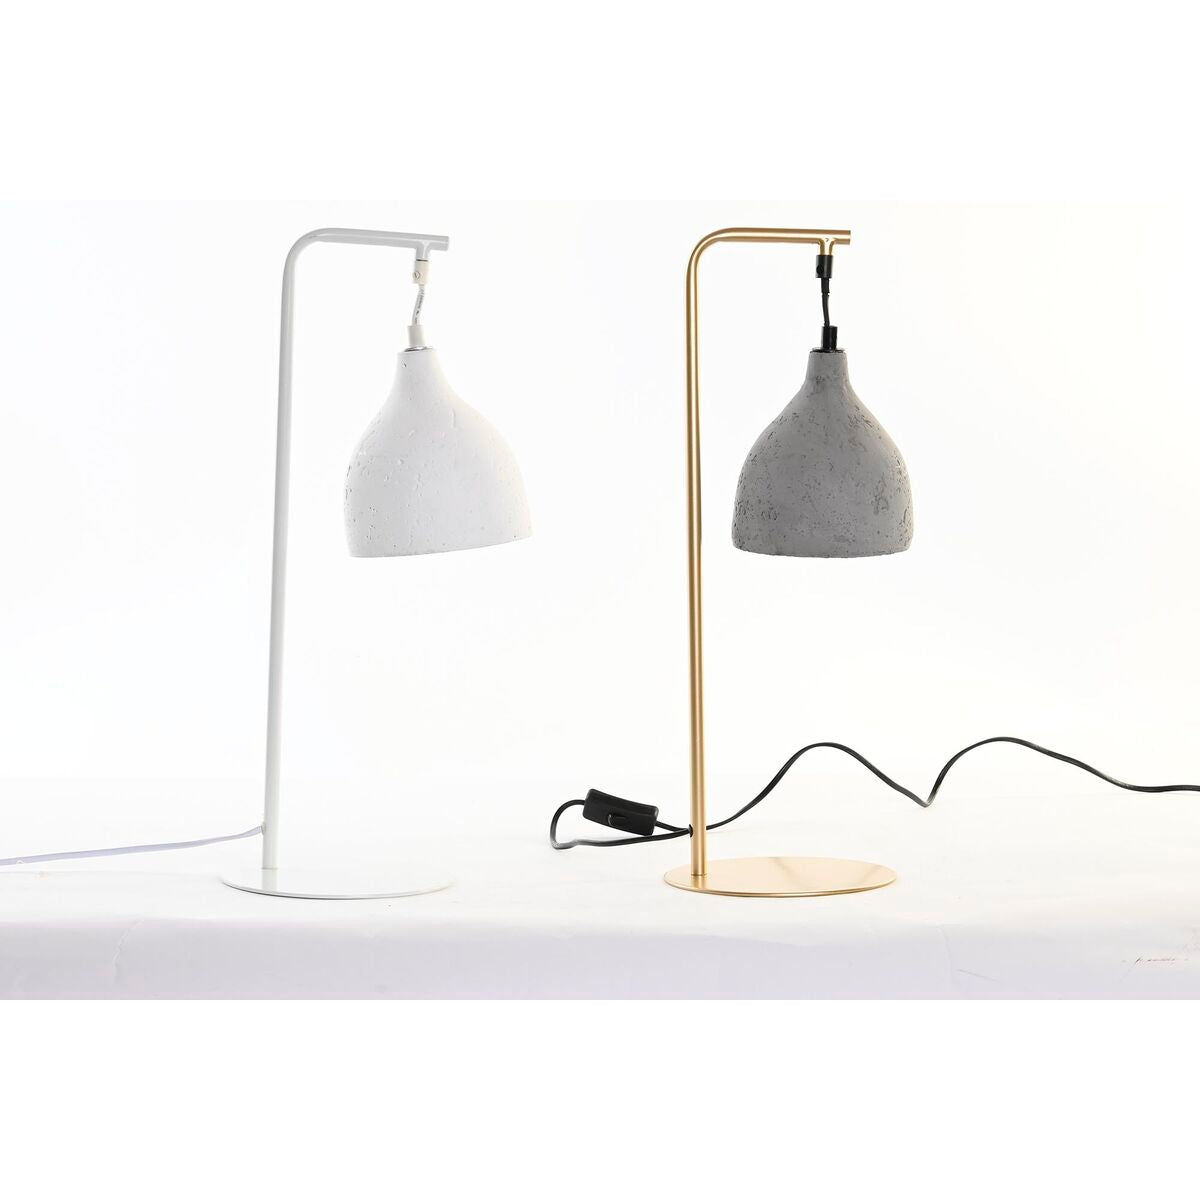 Metal Cement Table Lamp in White and Grey with Golden Support  50 W (21 x 17 x 49 cm) (2 Units)